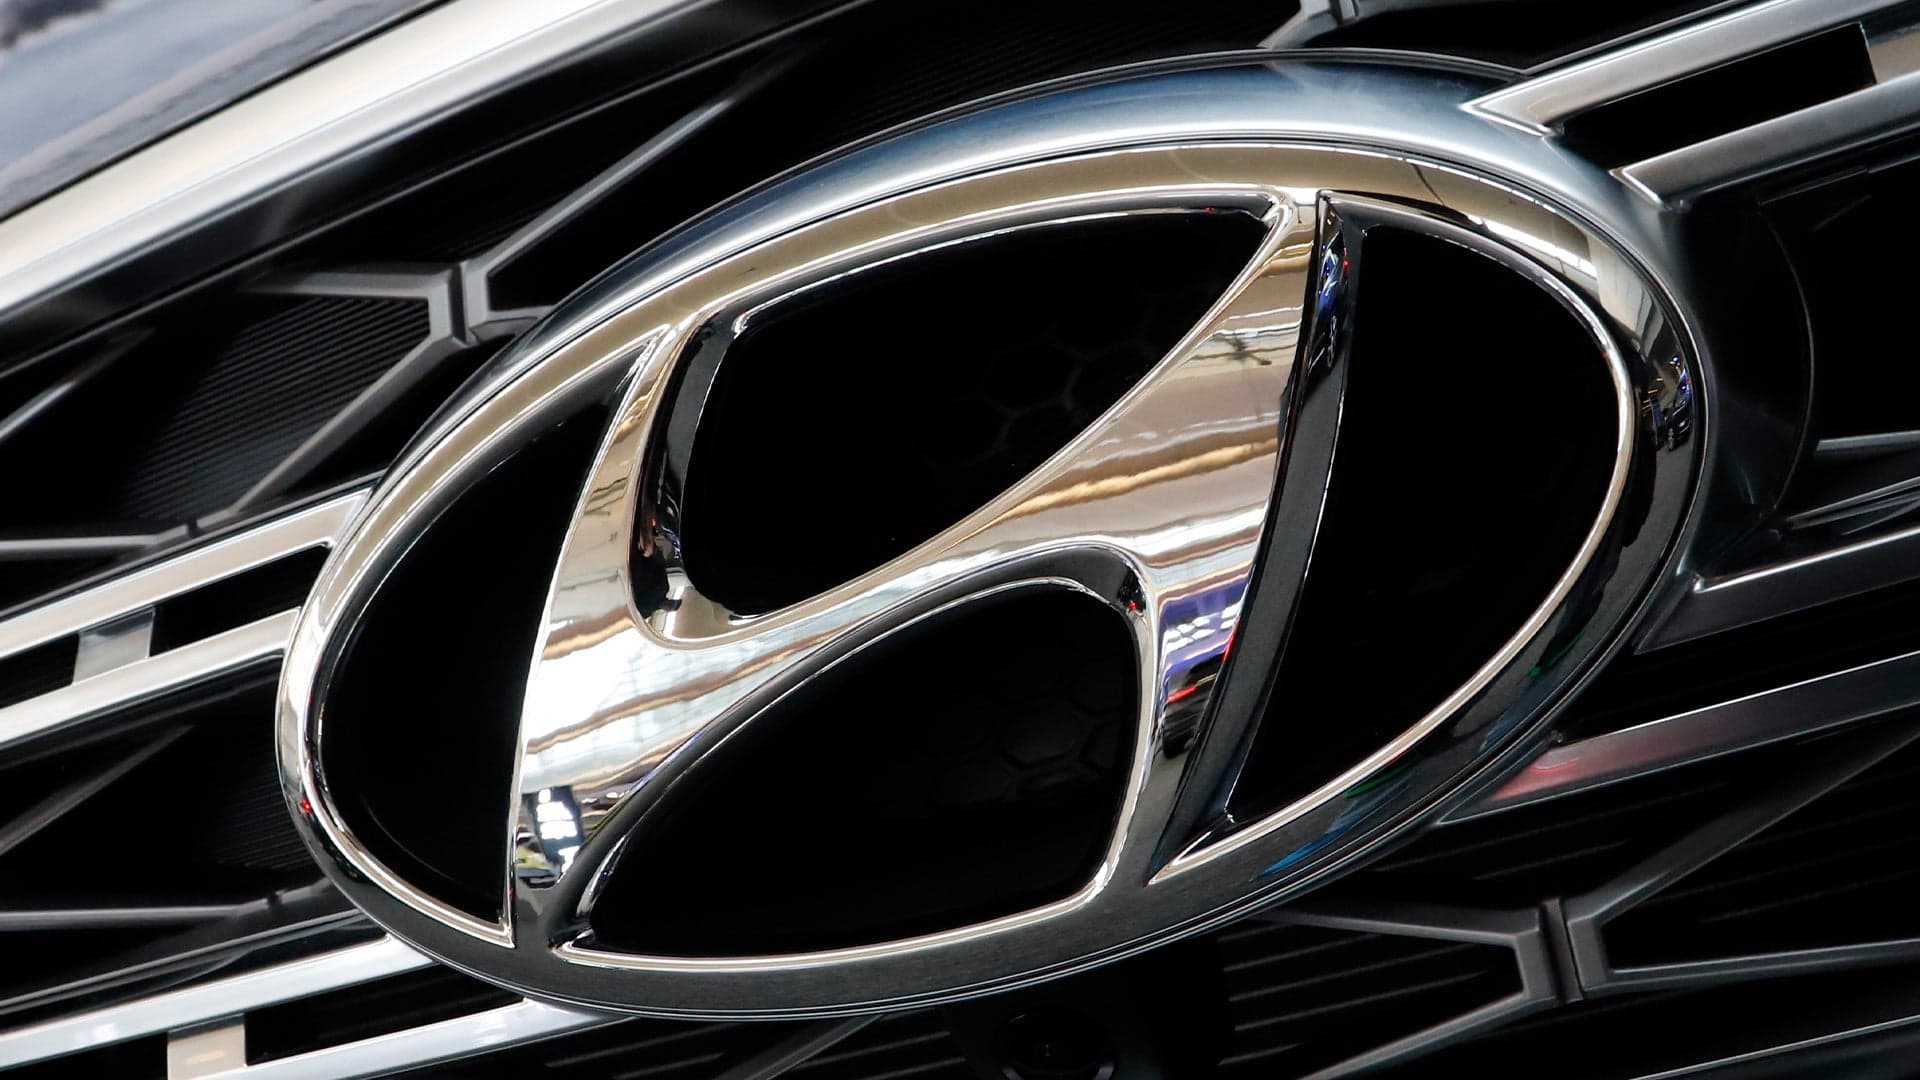 After All That, Hyundai Says It Isn’t in Talks to Build the Apple Car